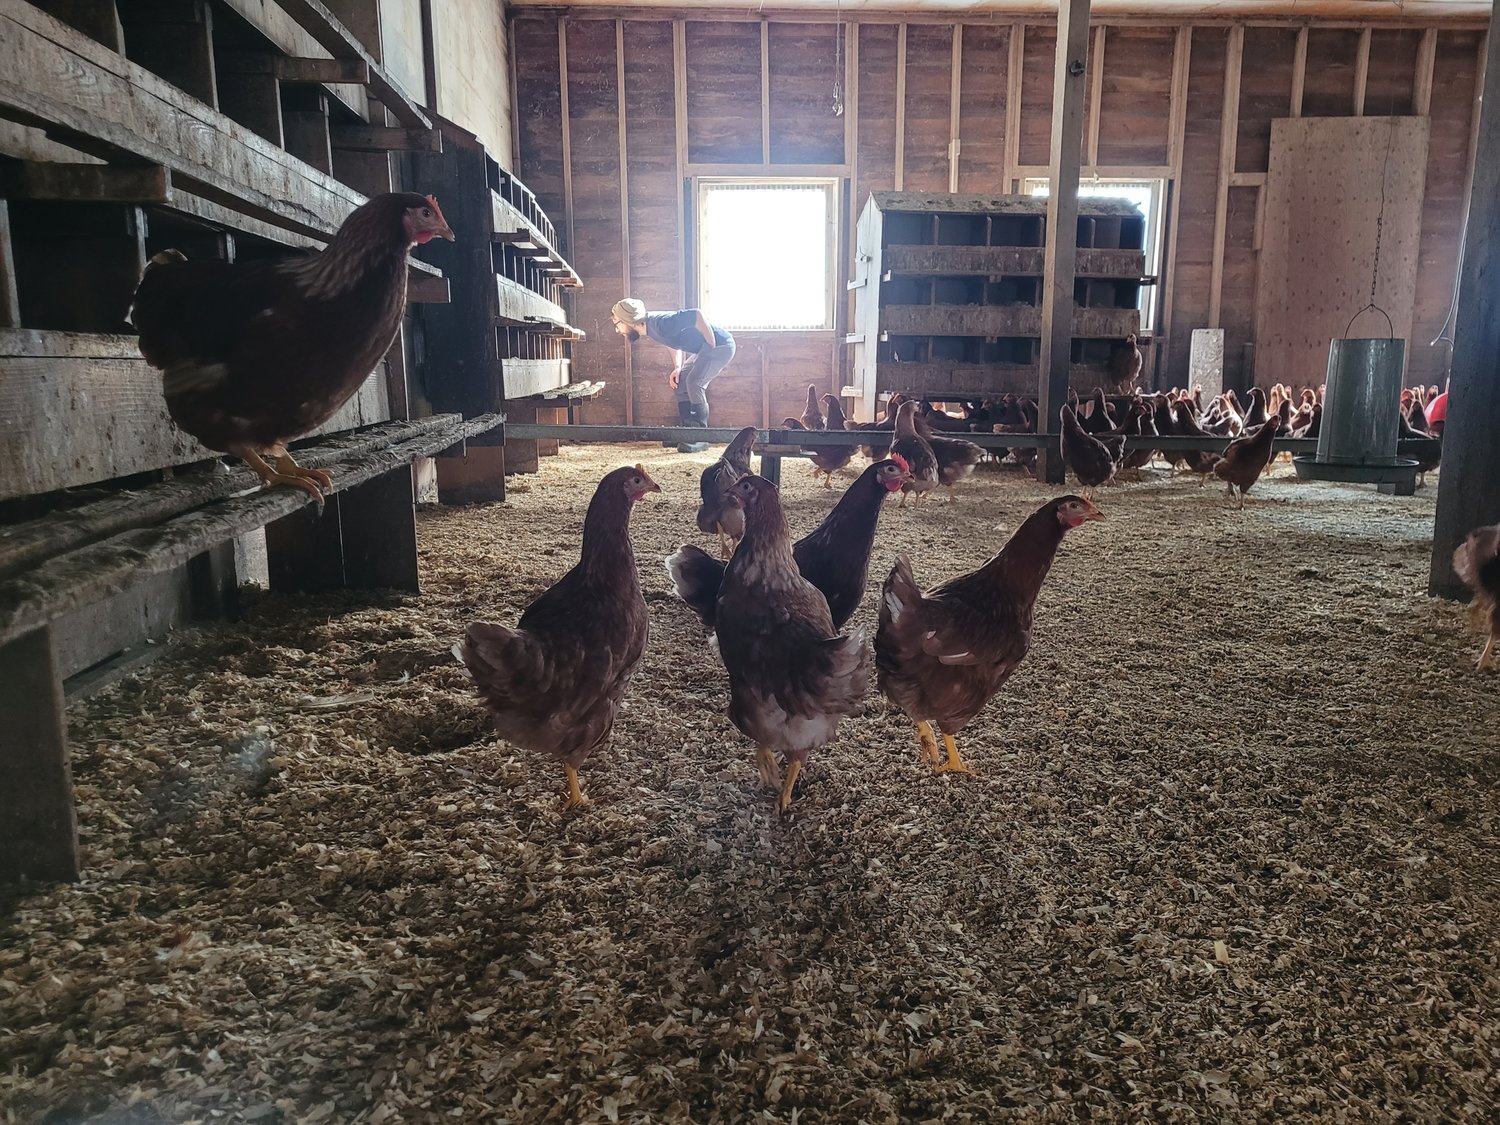 EGG-CEPTIONAL: Baffoni Poultry Farm in Johnston has several more than 70-year-old two-story chicken houses. The farm has about 20,000 chickens. Of those, around 7-8,000 are egg-laying hens, according to owner Adam Baffoni. The chickens lay approximately 3-4,000 eggs per day.